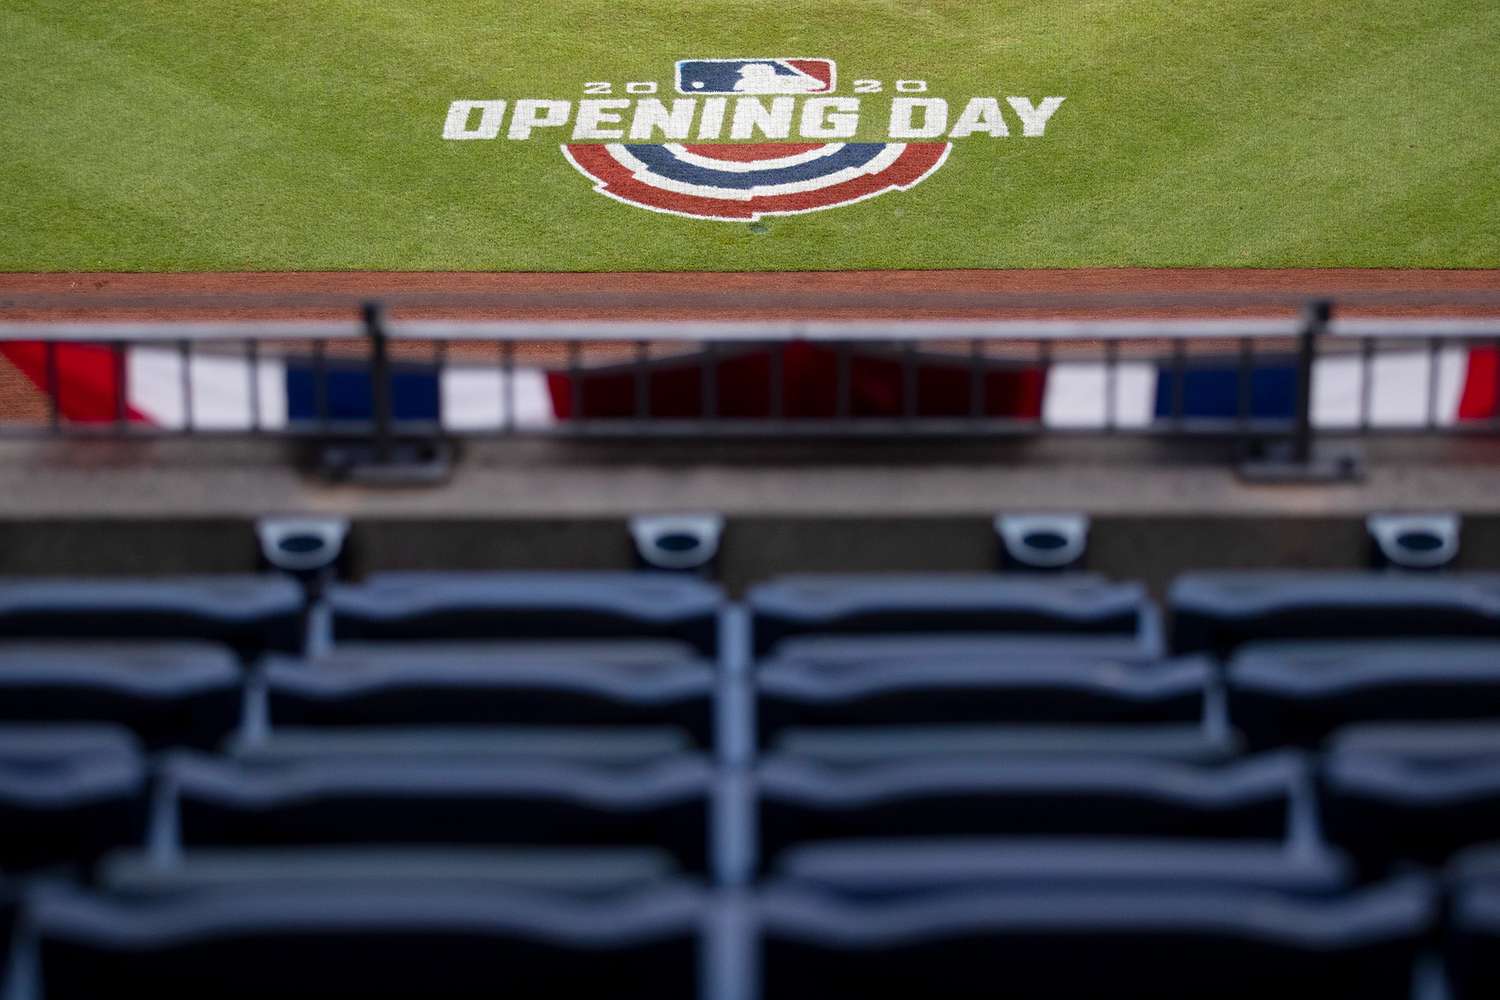 A general view of the 2020 Opening Day logo during the game between the Miami Marlins and Philadelphia Phillies at Citizens Bank Park